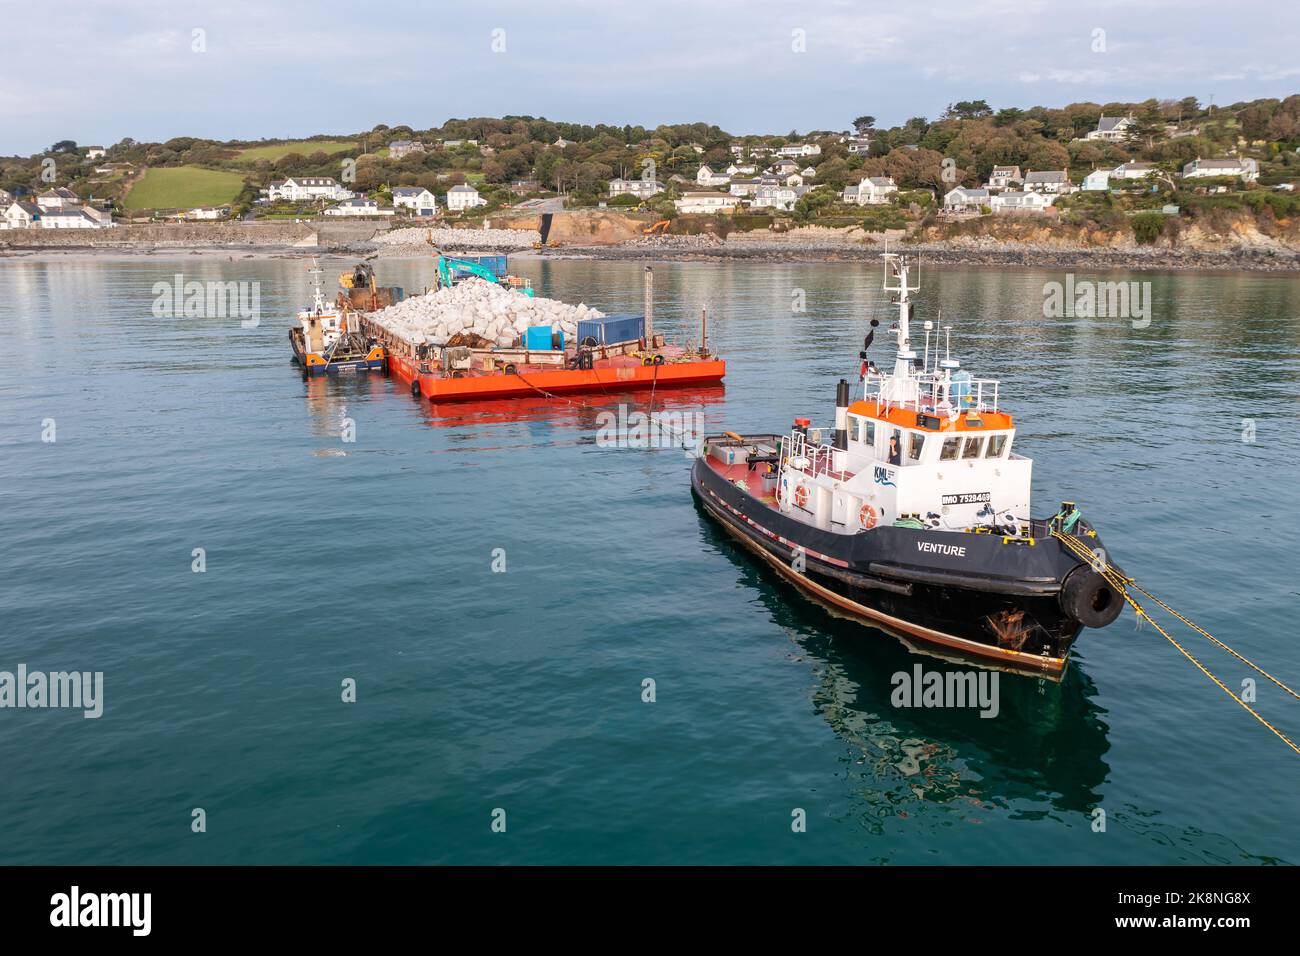 COVERACK, UK - SEPTEMBER 20, 2022.  A nautical tugboat and barge delivering quarried stone to enable the repair of the sea defences in Coverack, Cornw Stock Photo